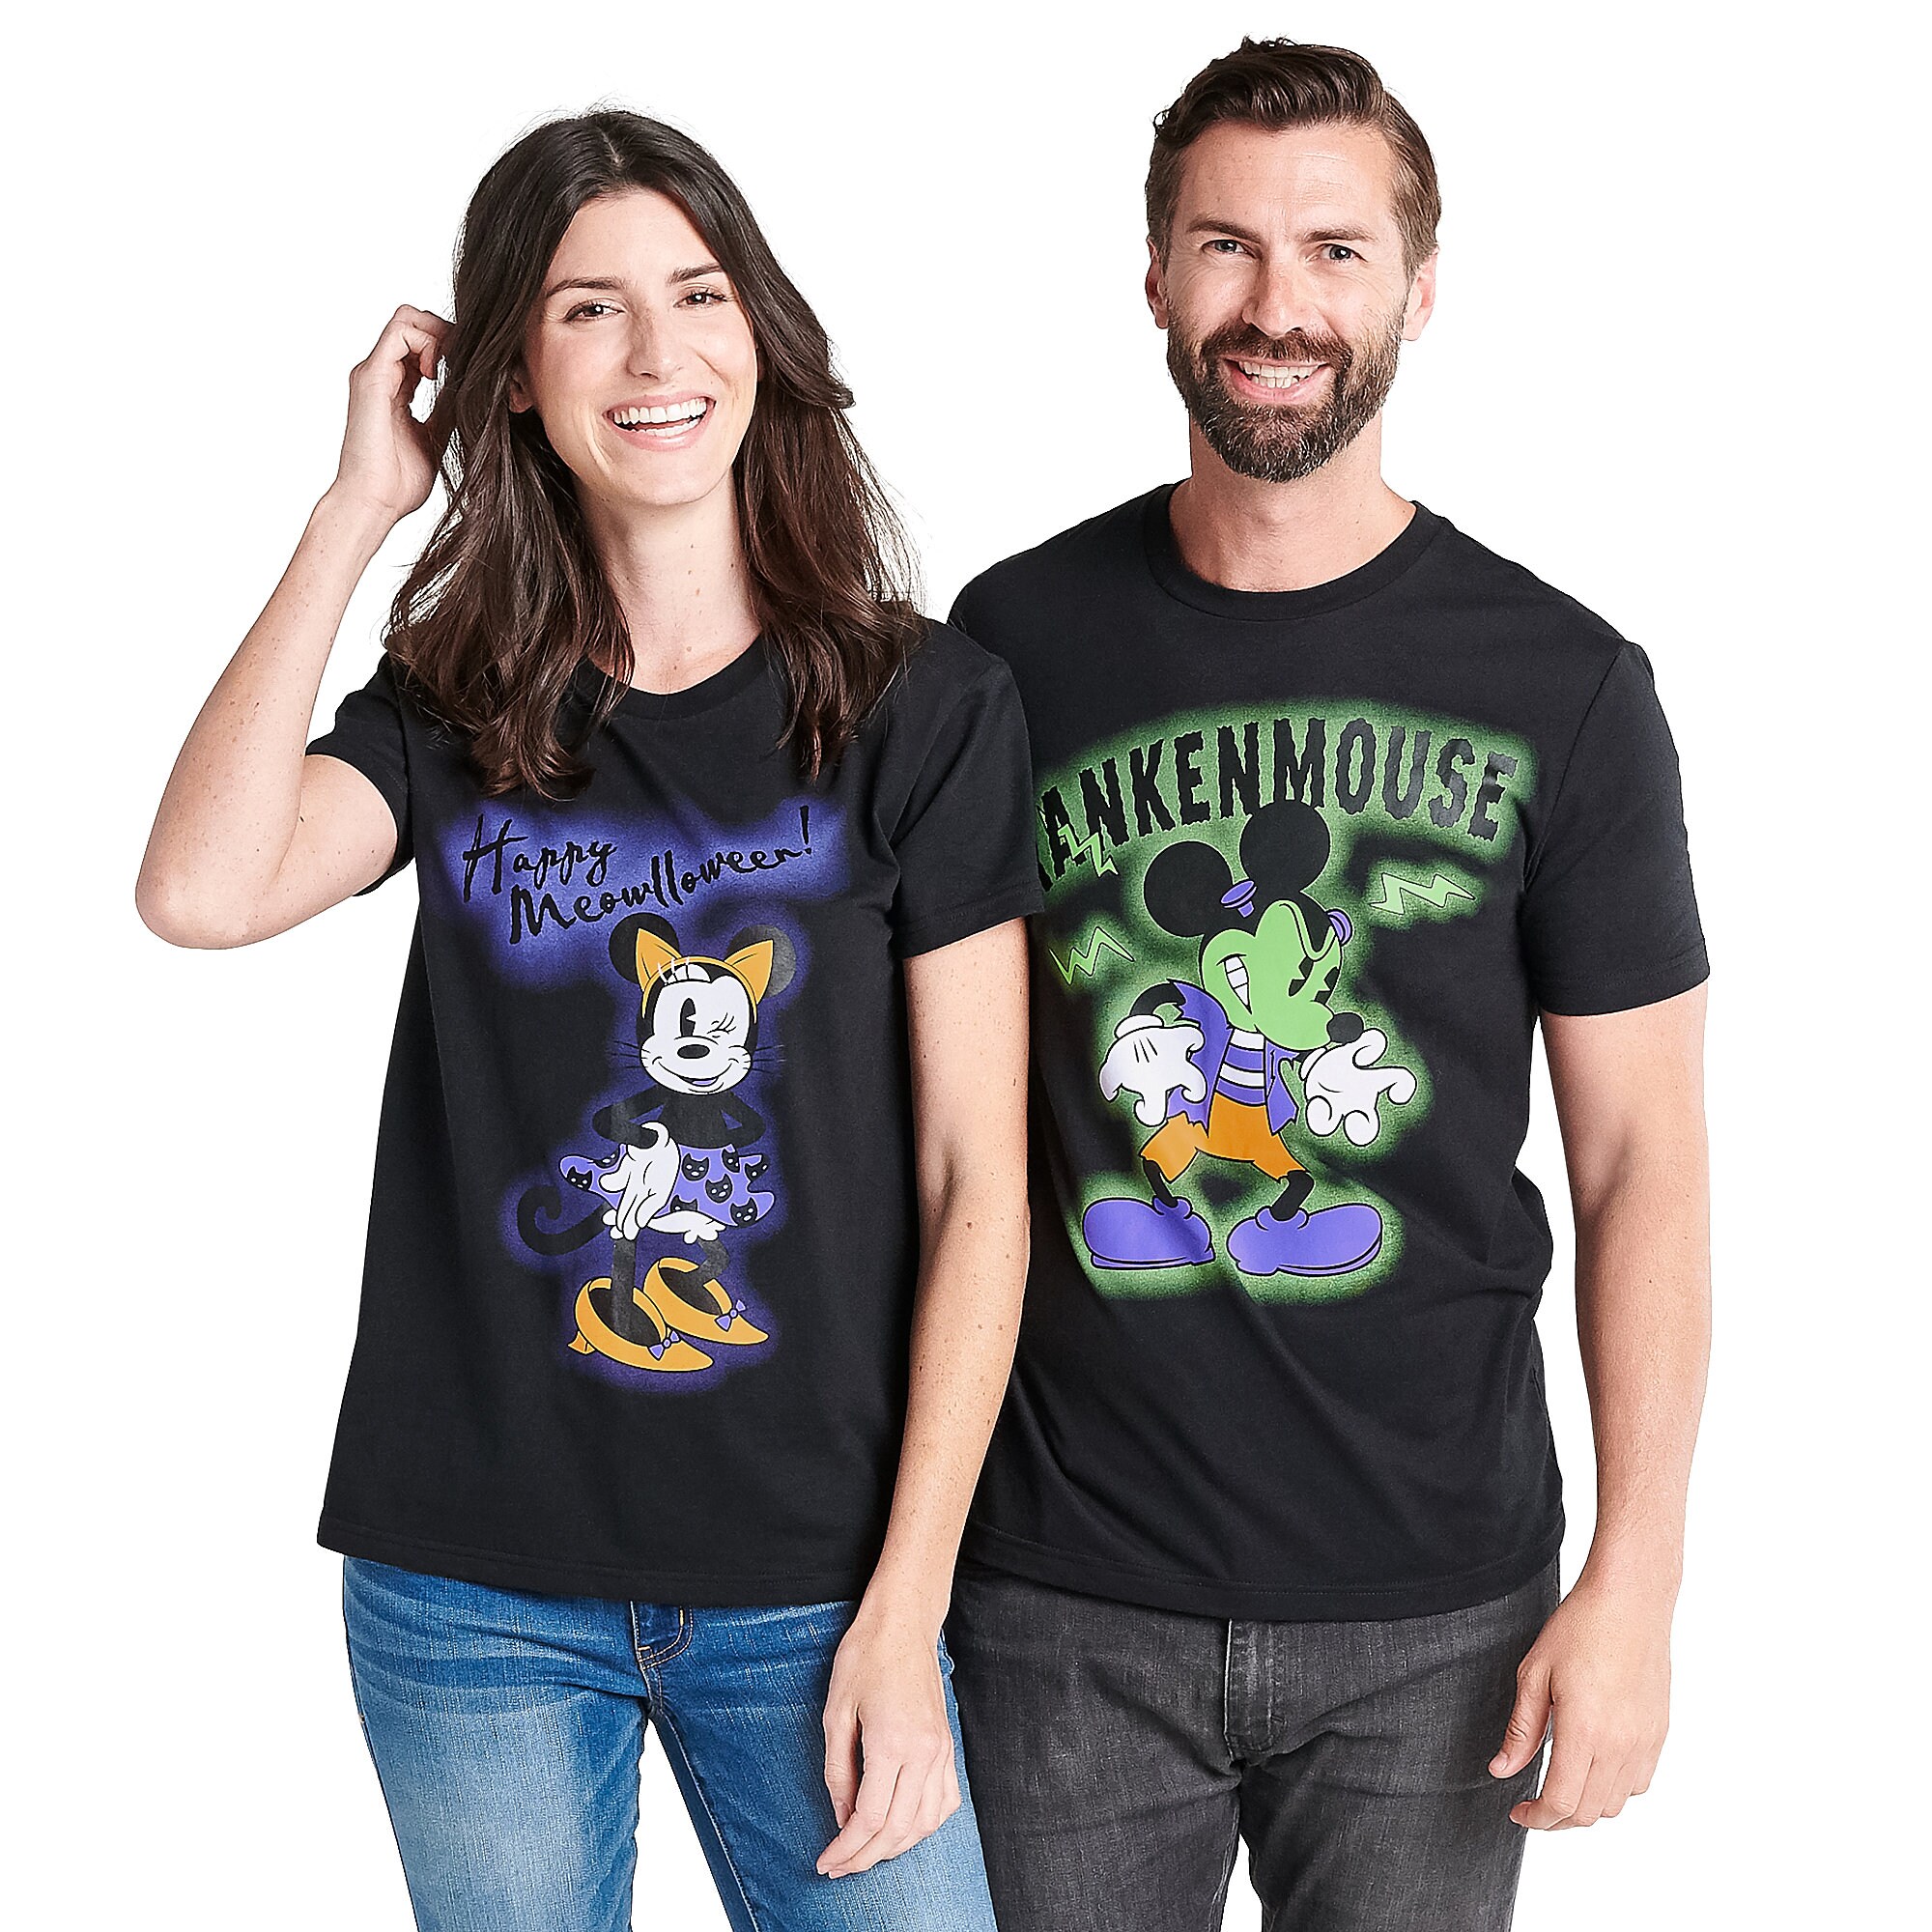 Minnie Mouse Halloween T-Shirt for Women - Glow-in-the-Dark